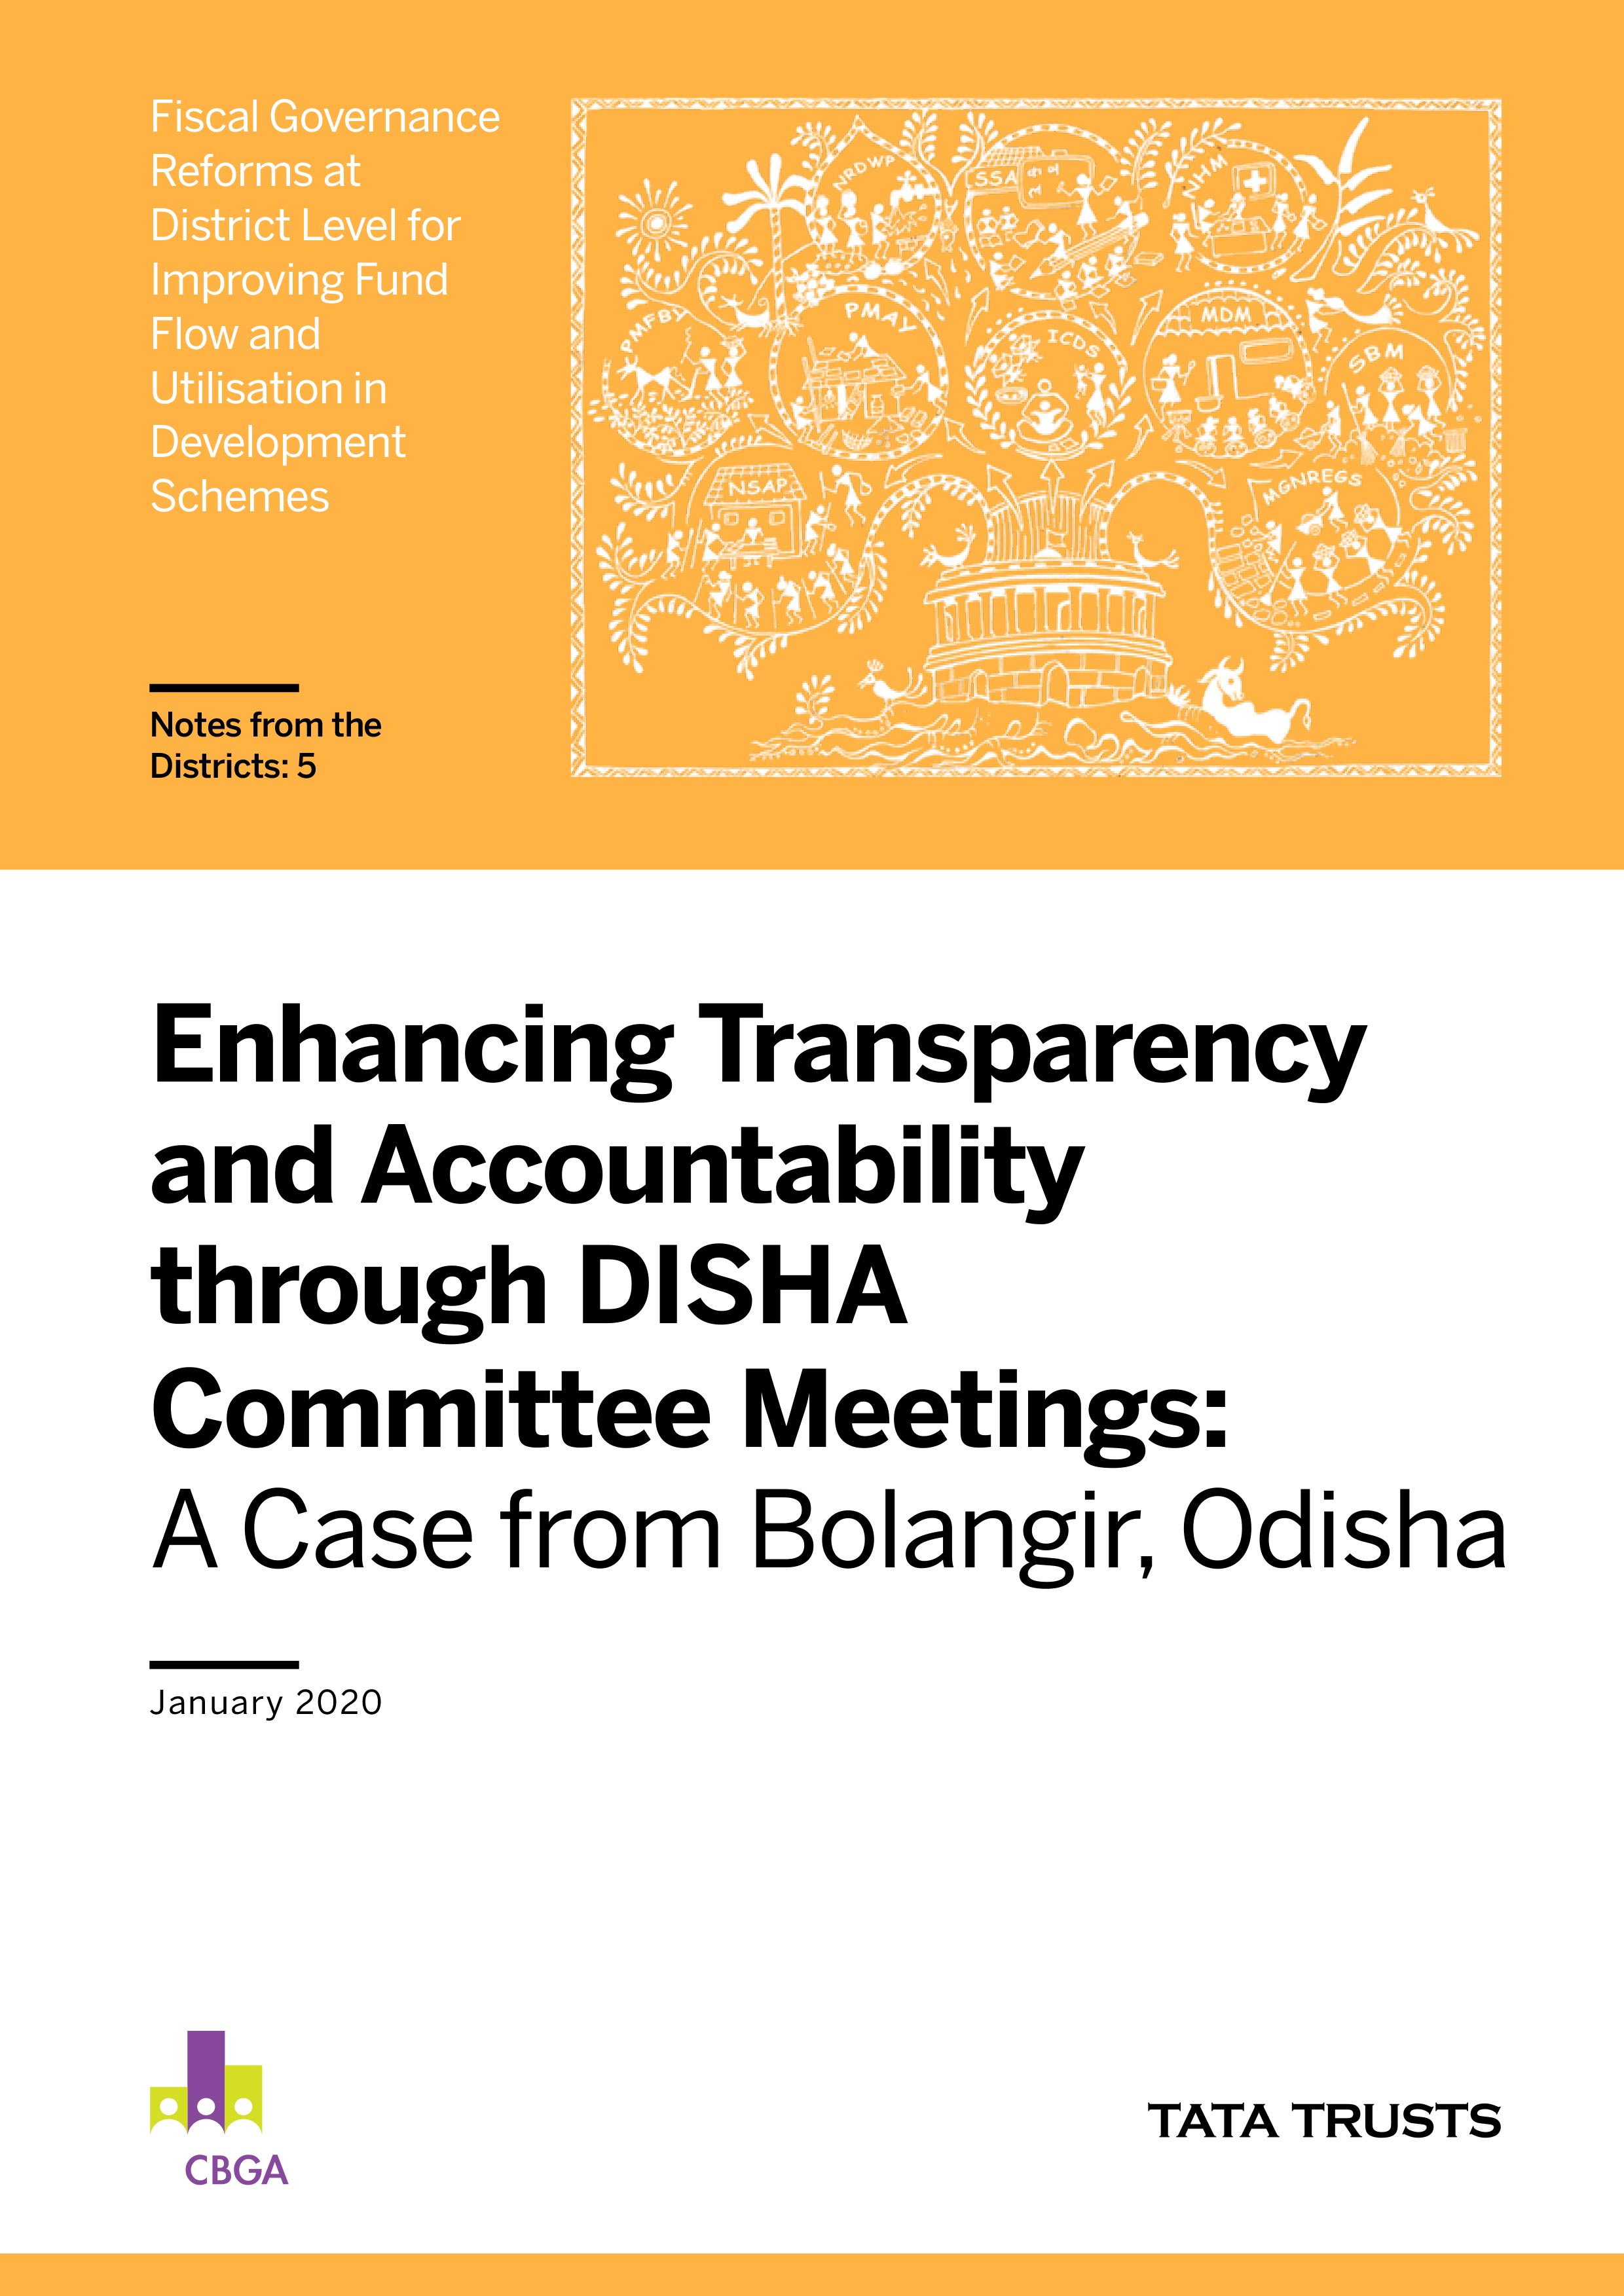 Enhancing Transparency and Accountability through DISHA Committee-Case of Bolangir